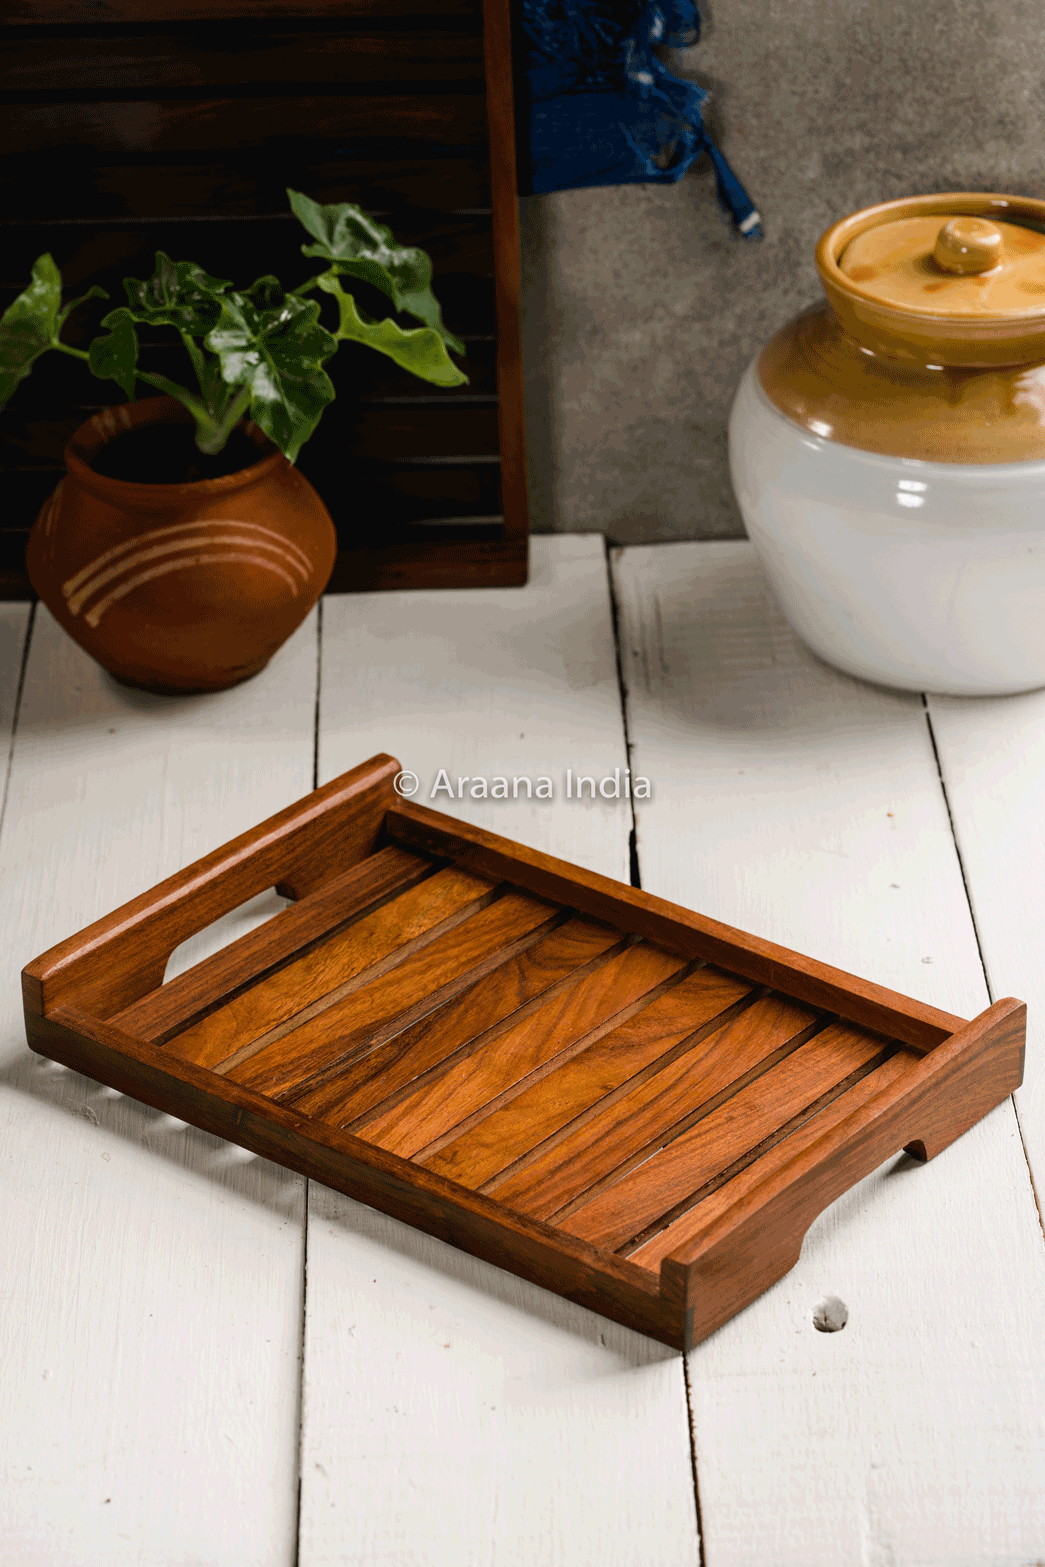 Dhaari - Striped wooden serving tray, a product by Araana Homes